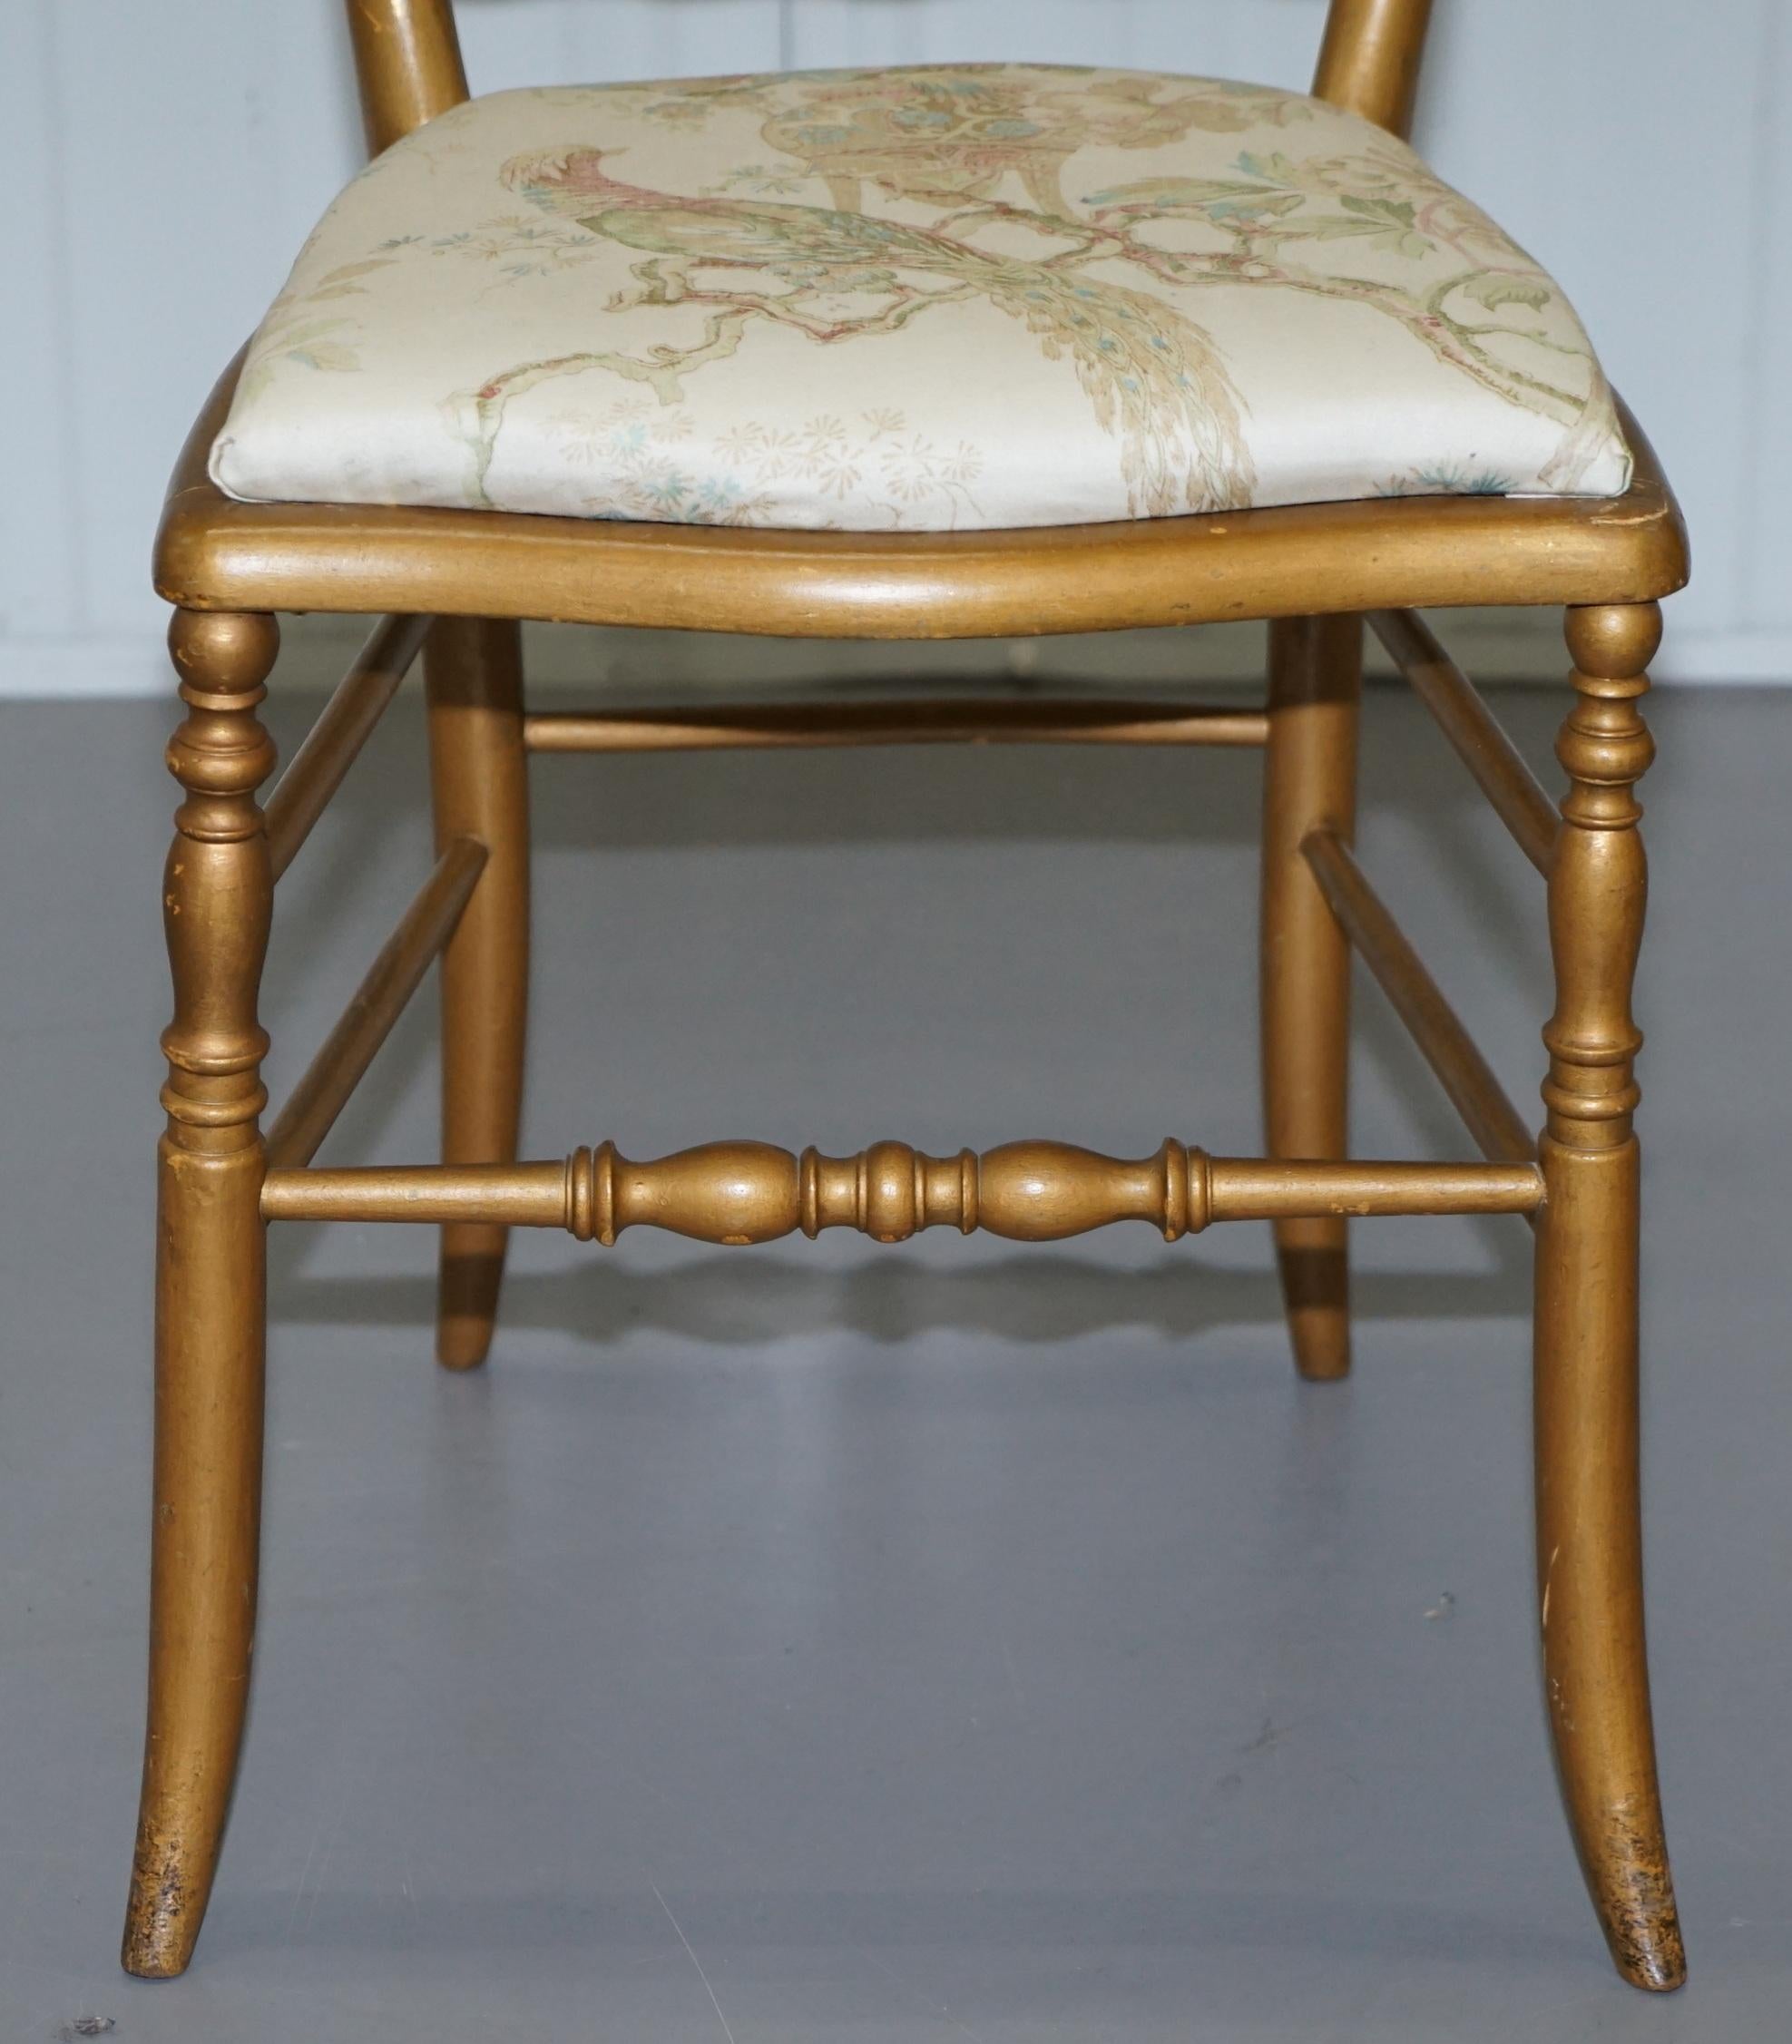 Regency Style Gold Giltwood Spindle Chair circa 1900 Ornate Bird Upholstery For Sale 2